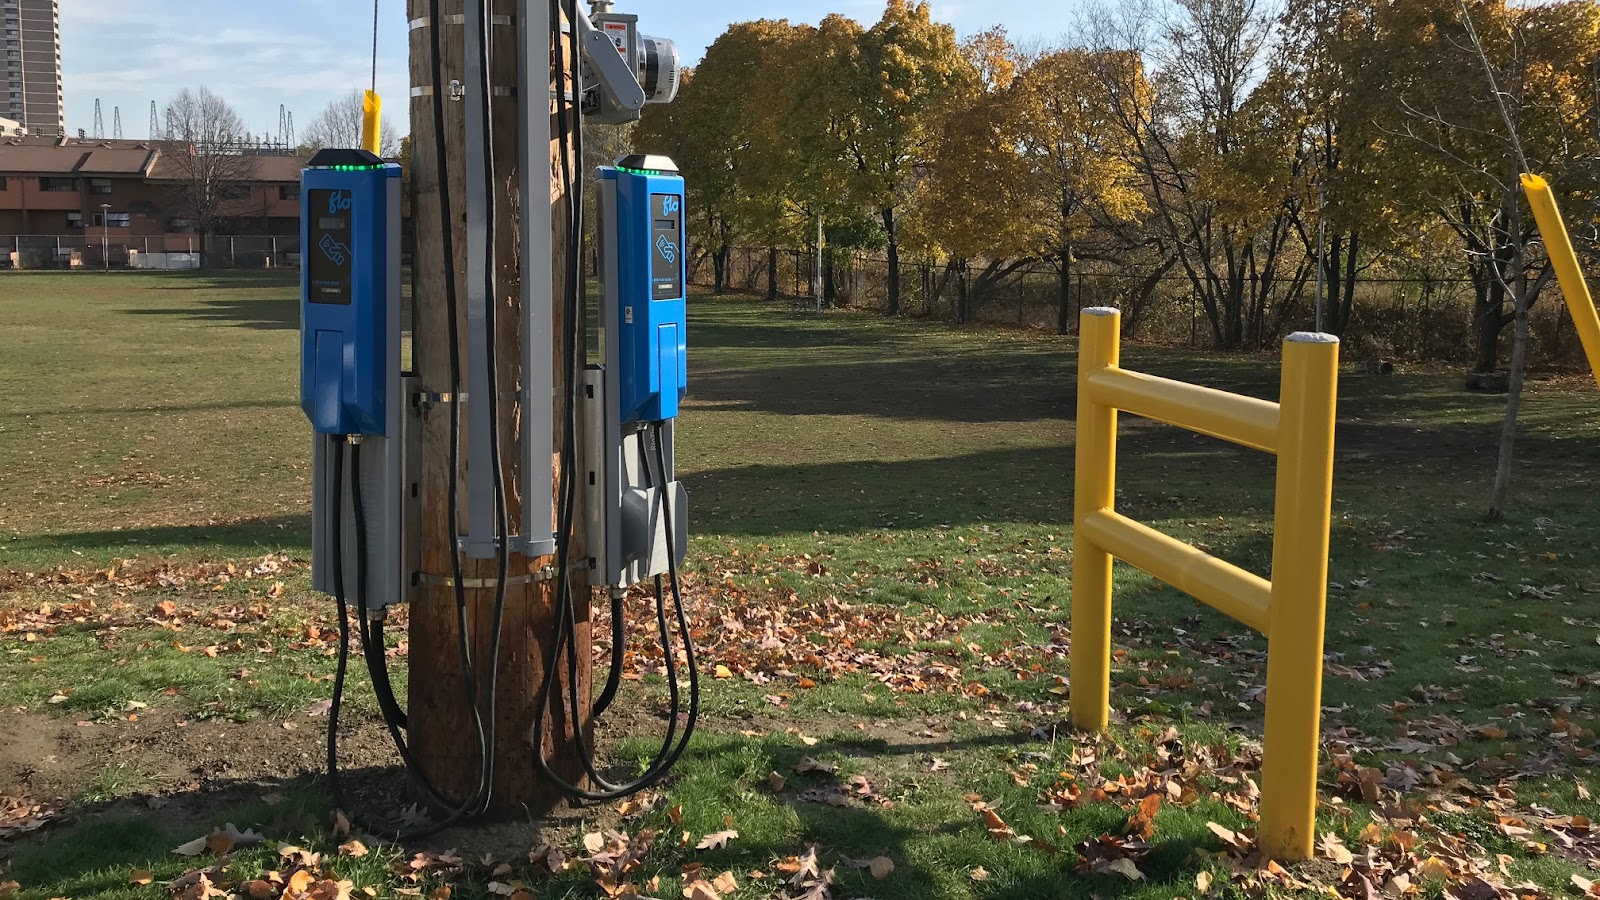 On-Street Electric Vehicle Charging Station